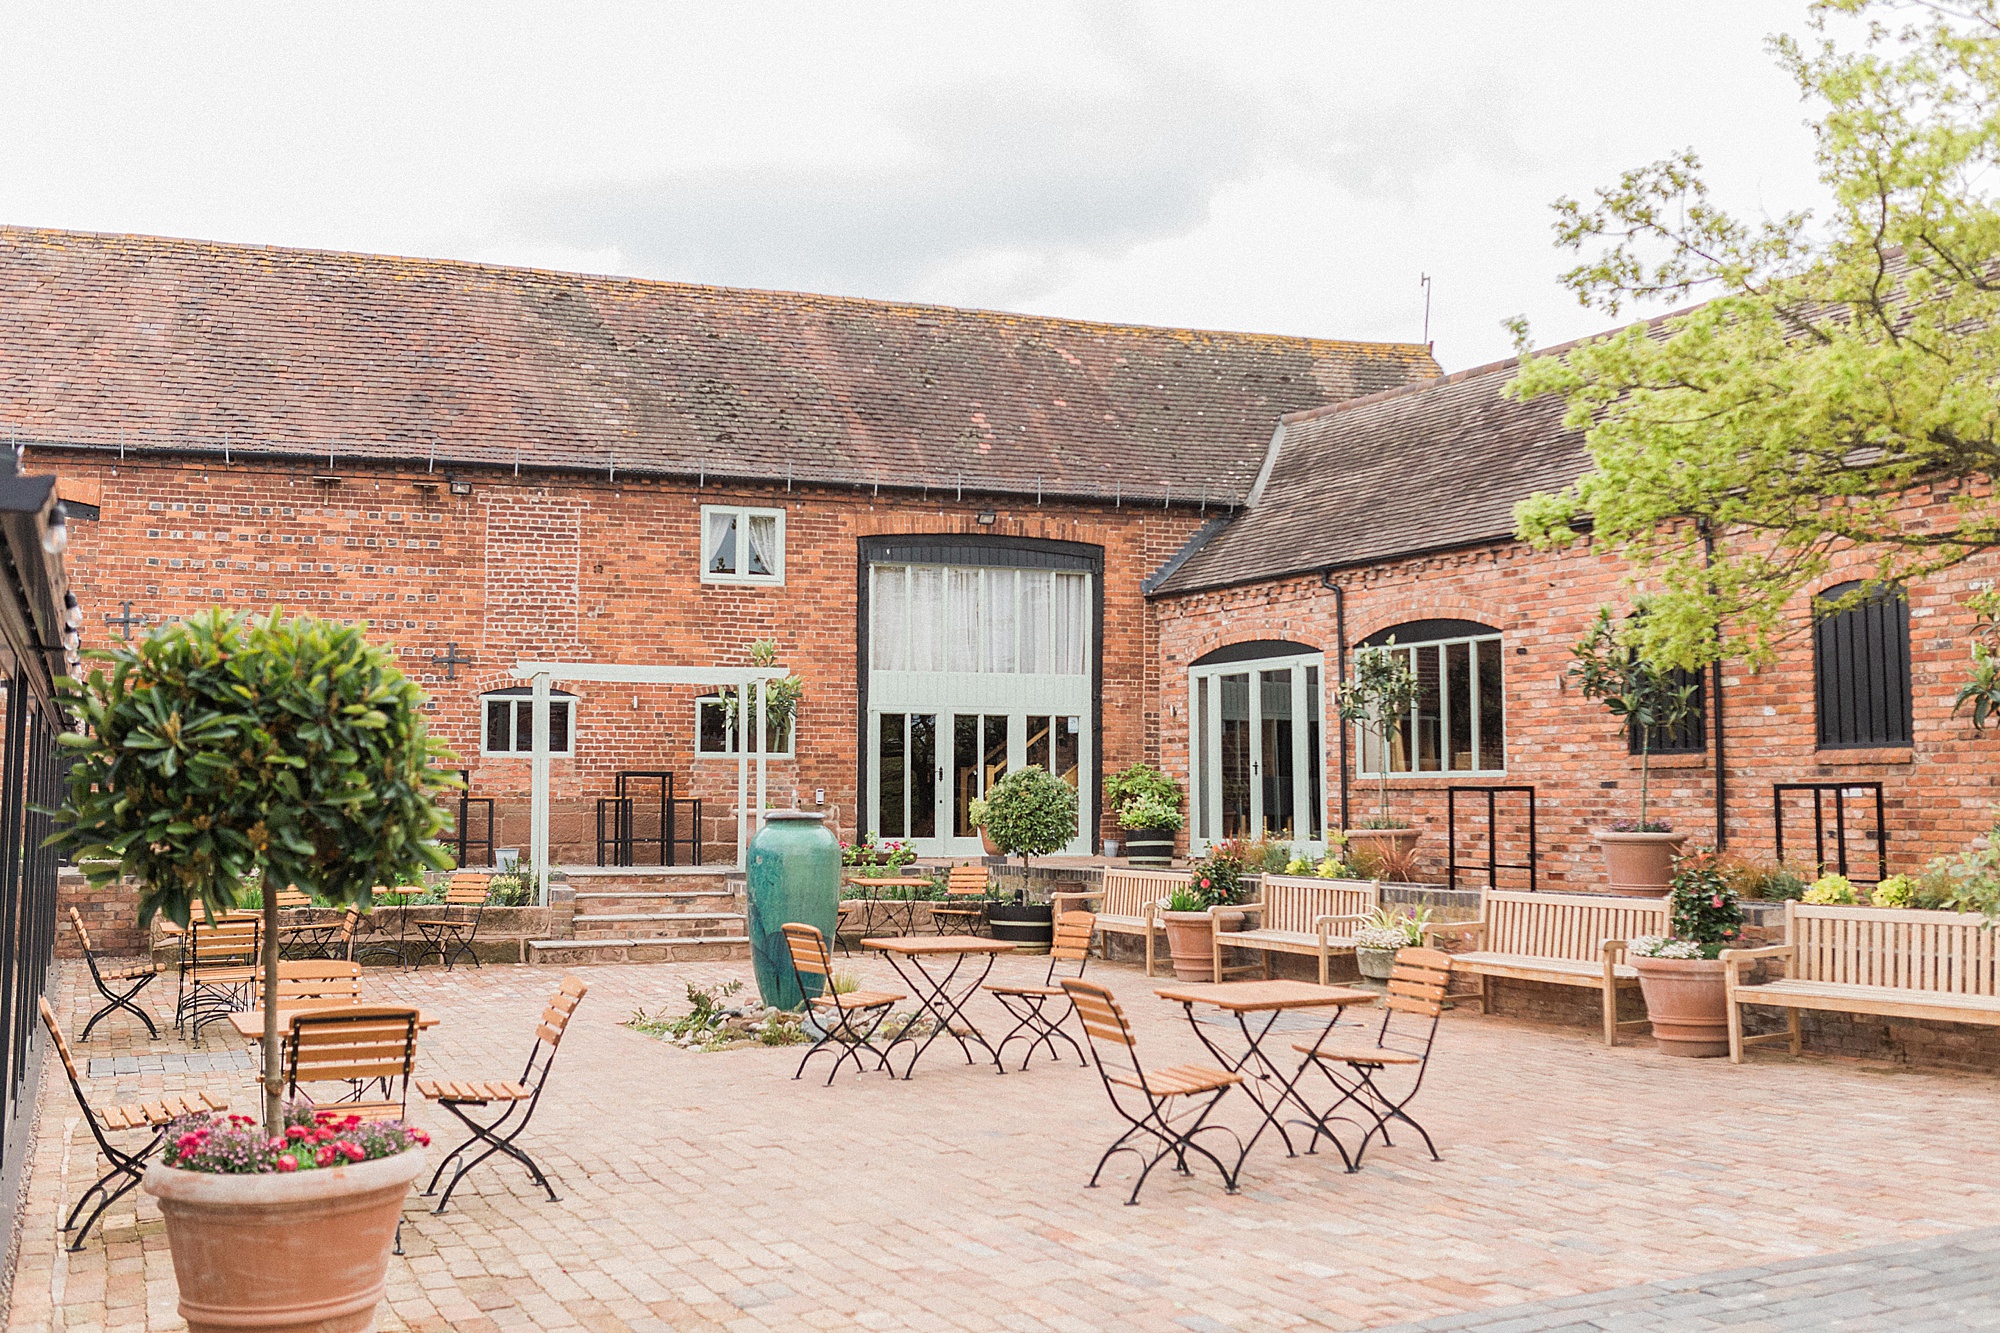 Exterior view of curradine barns shrawley worcestershire - image shows the courtyard and their new extensive with the barns in the background 